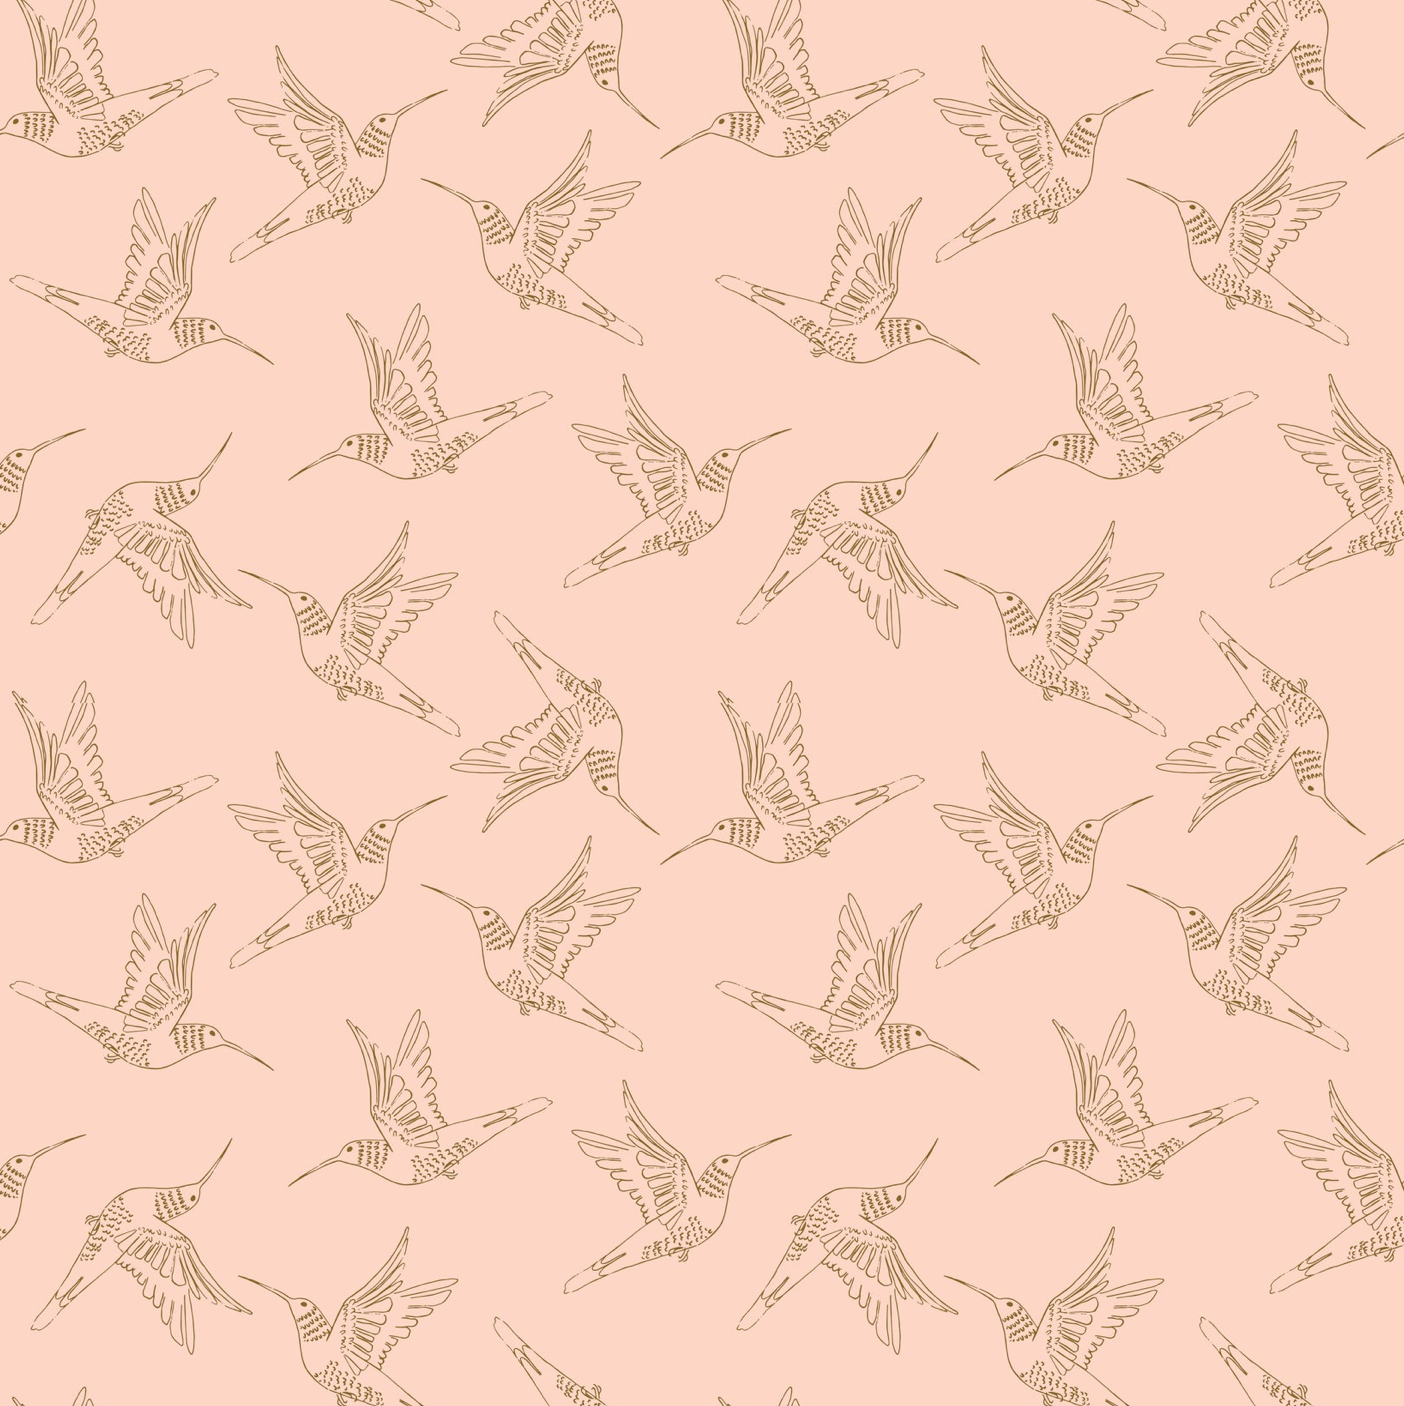 Serenity Blooms, Hummingbird Dance Peach, SR24505, sold by the 1/2 yard, *PREORDER